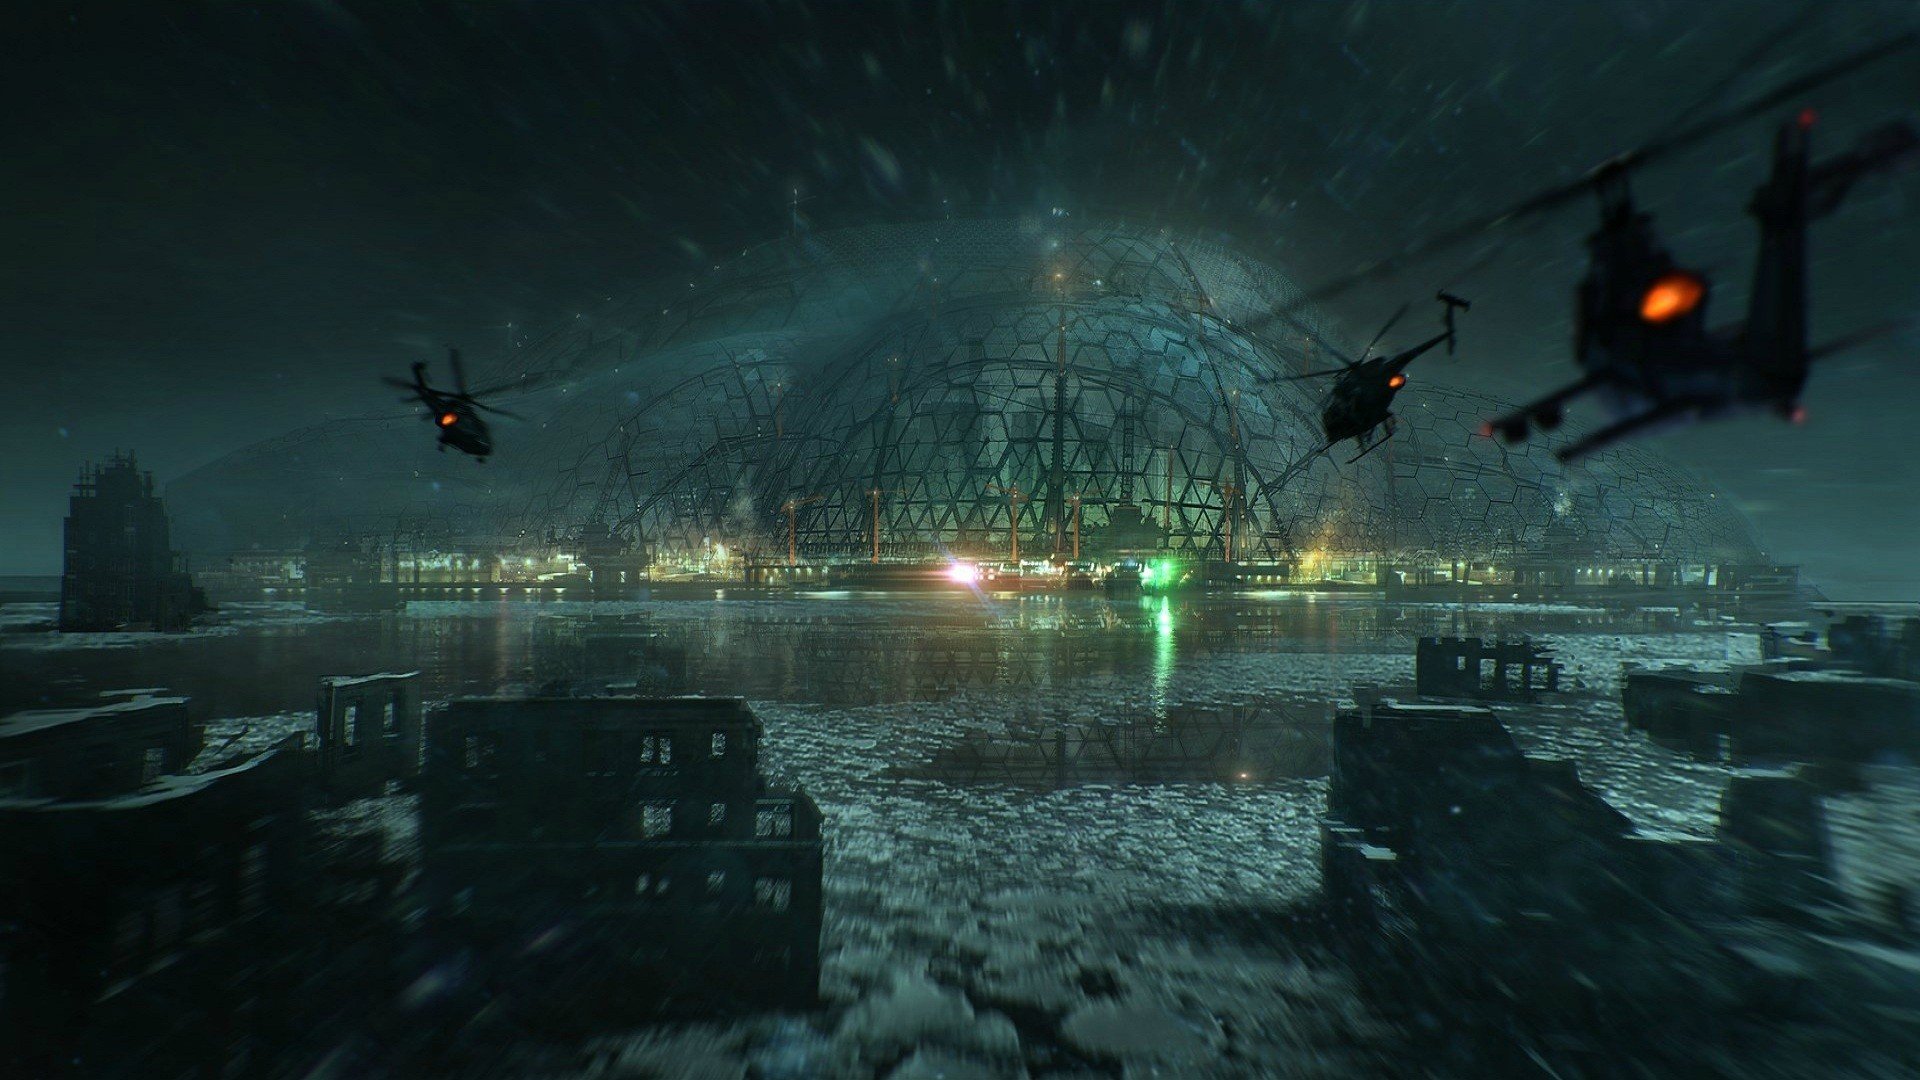 water, Video, Games, Helicopters, Crysis, Fantasy, Art, Artwork, Dome, Crysis Wallpaper